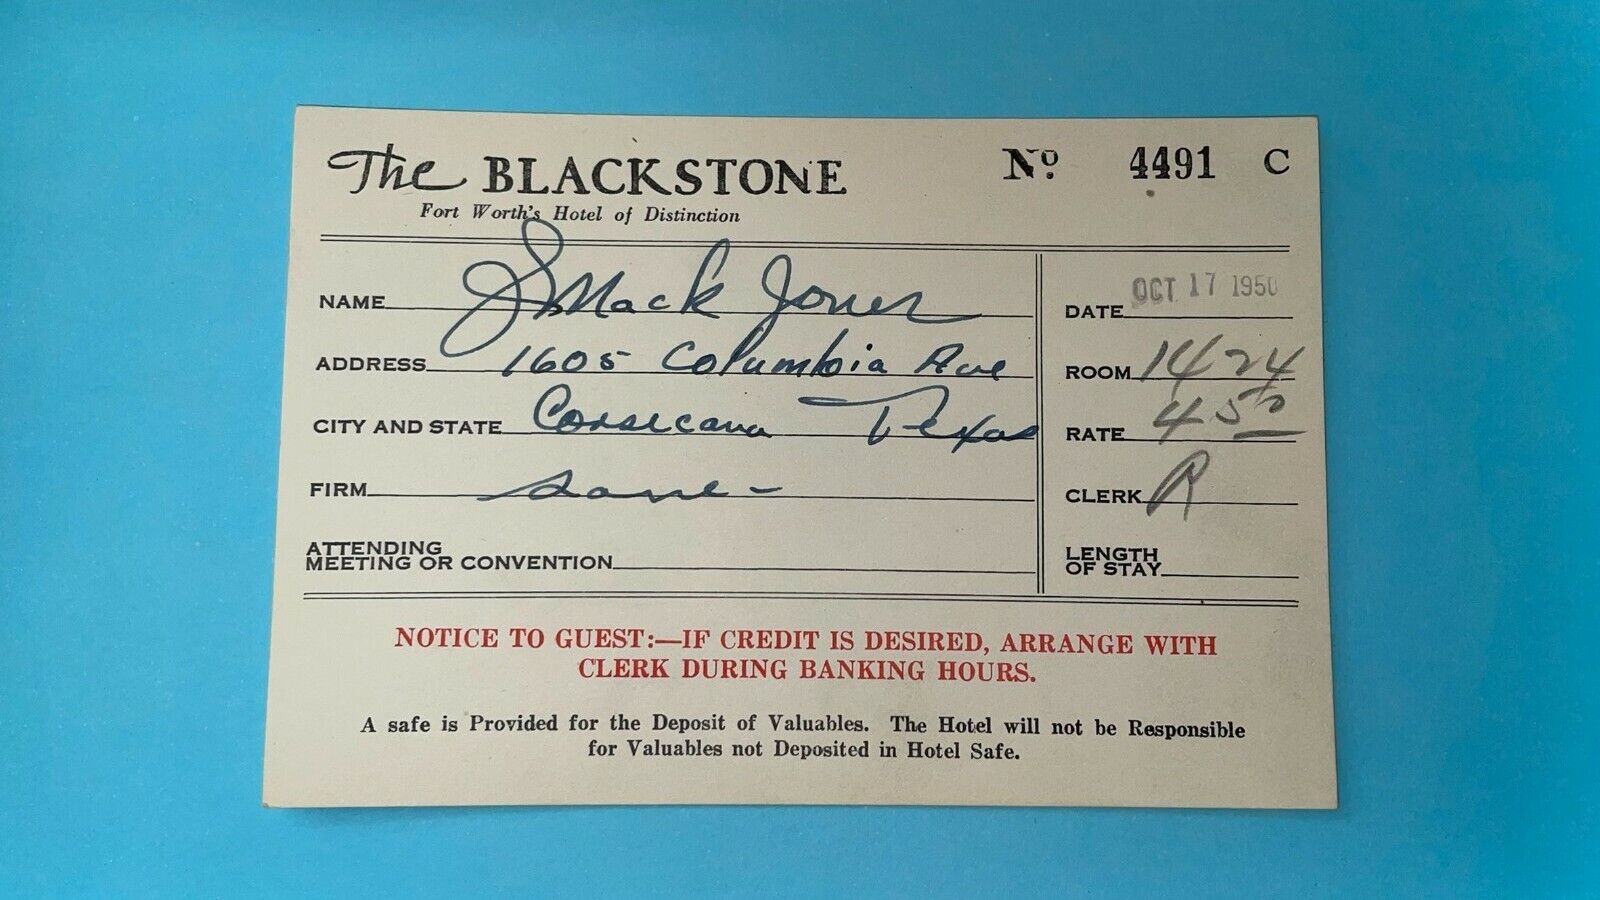 Vintage historic check in card 1950 Blackstone Hotel Fort Worth  MINT